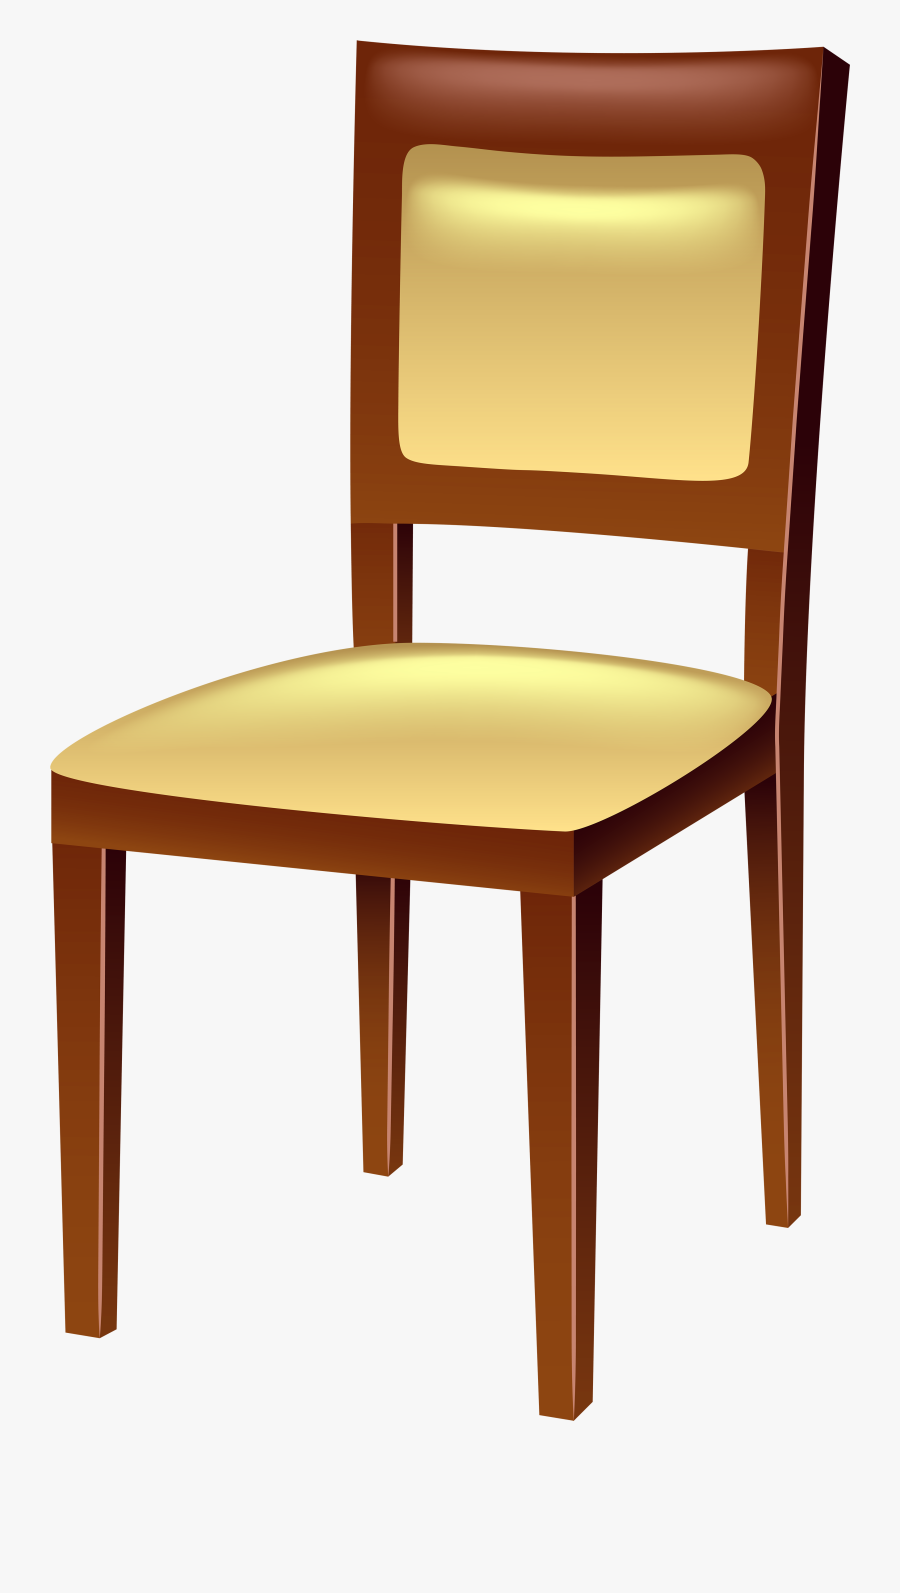 Chair Clipart Png - Clip Art Of Chair, Transparent Clipart